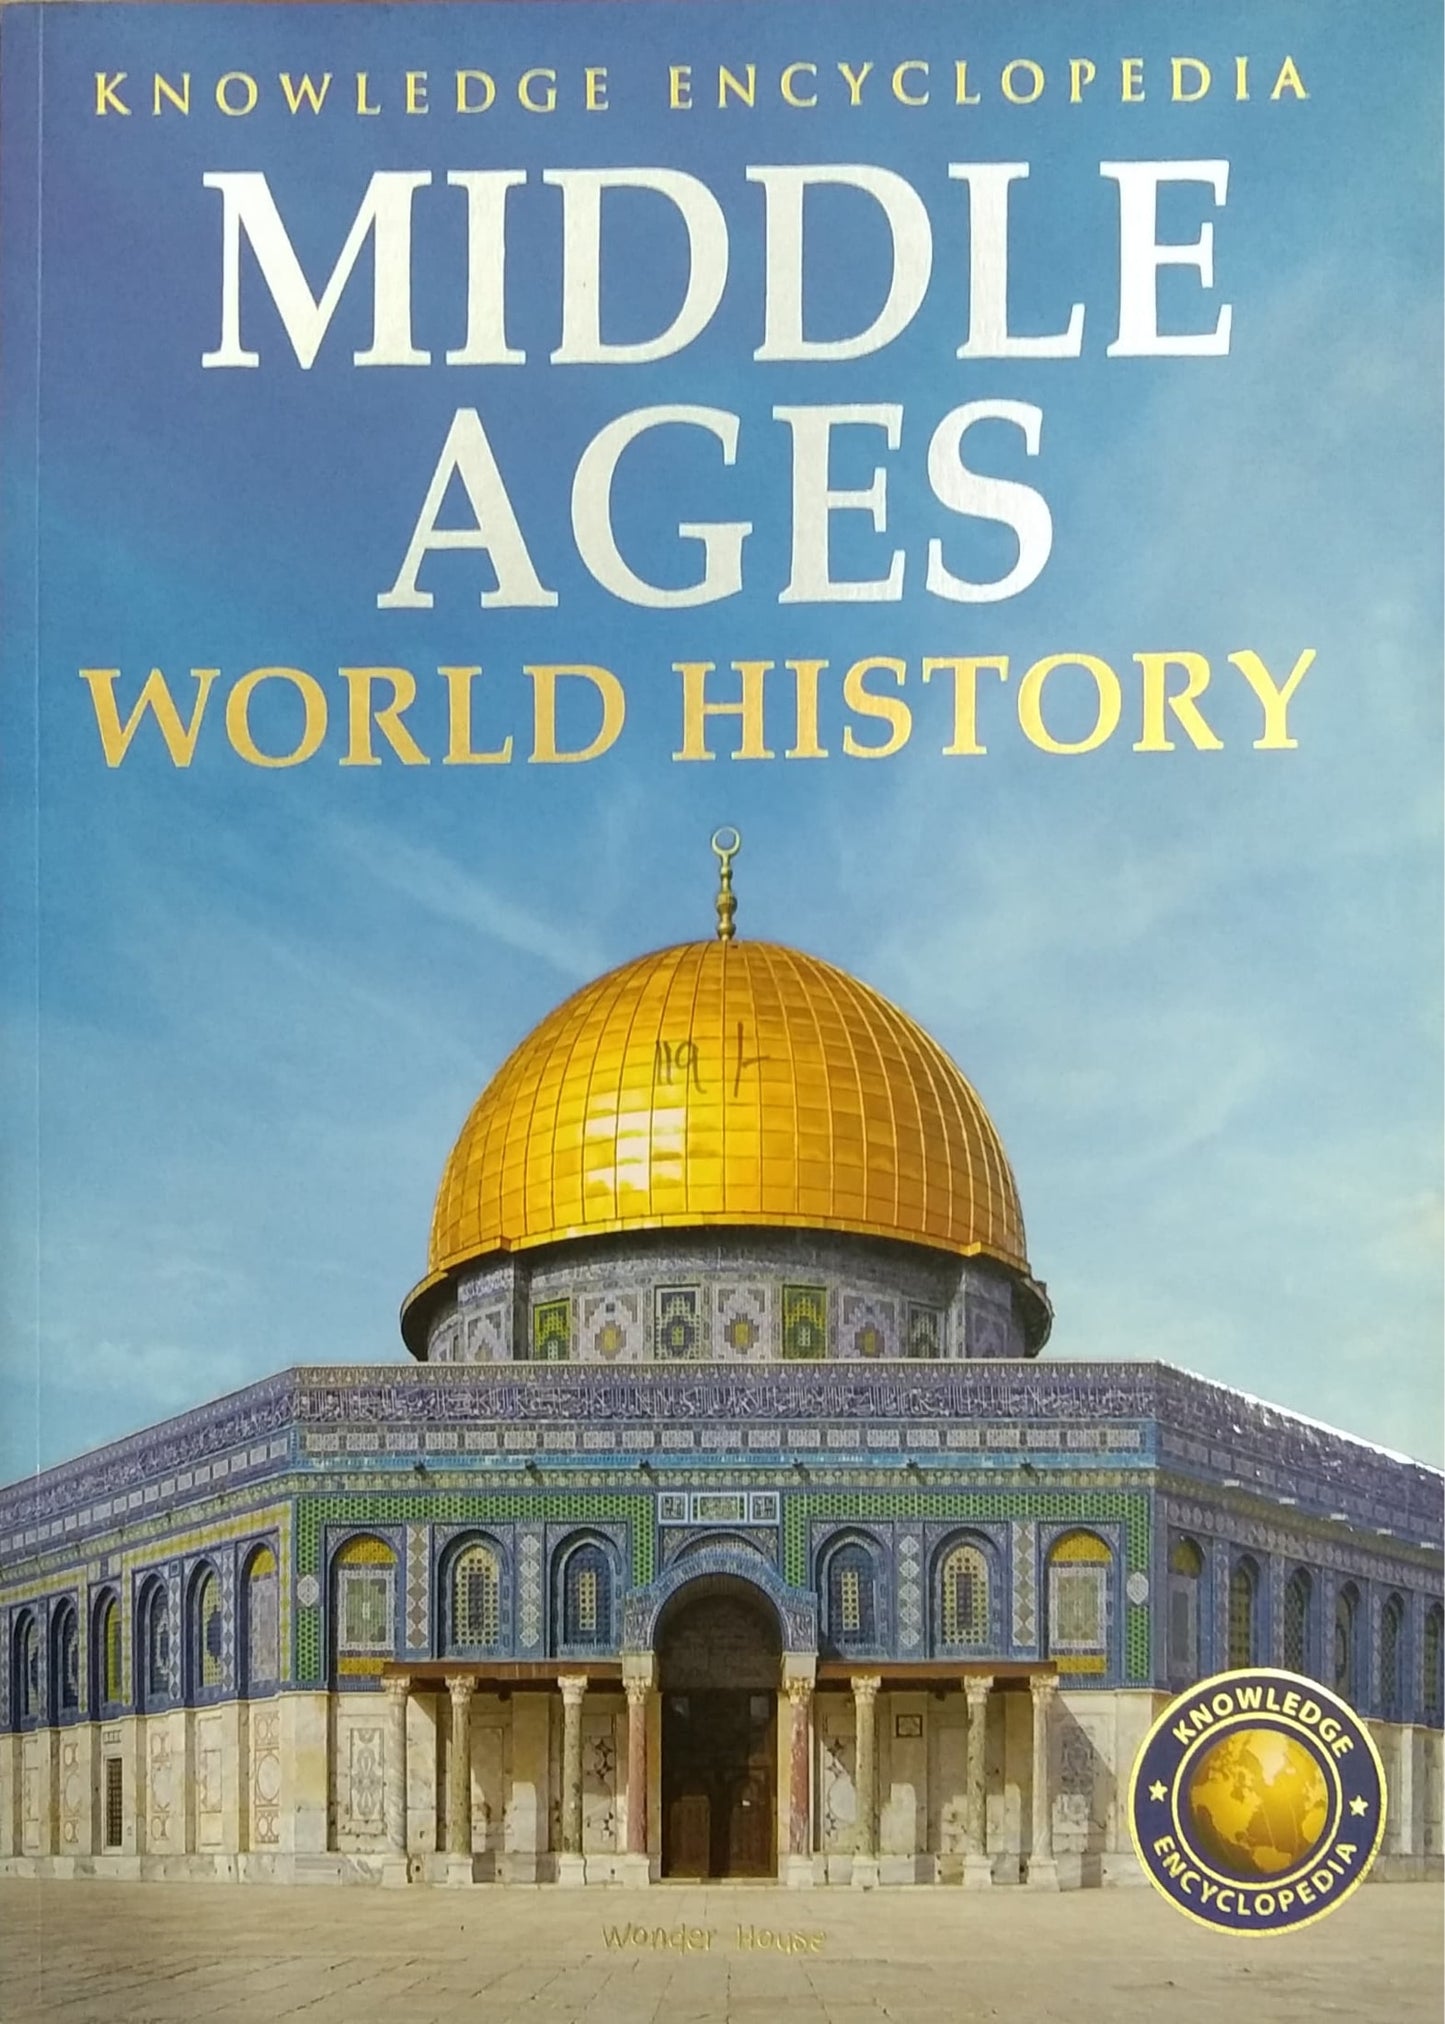 MIDDLE AGES WORLD HISTORY